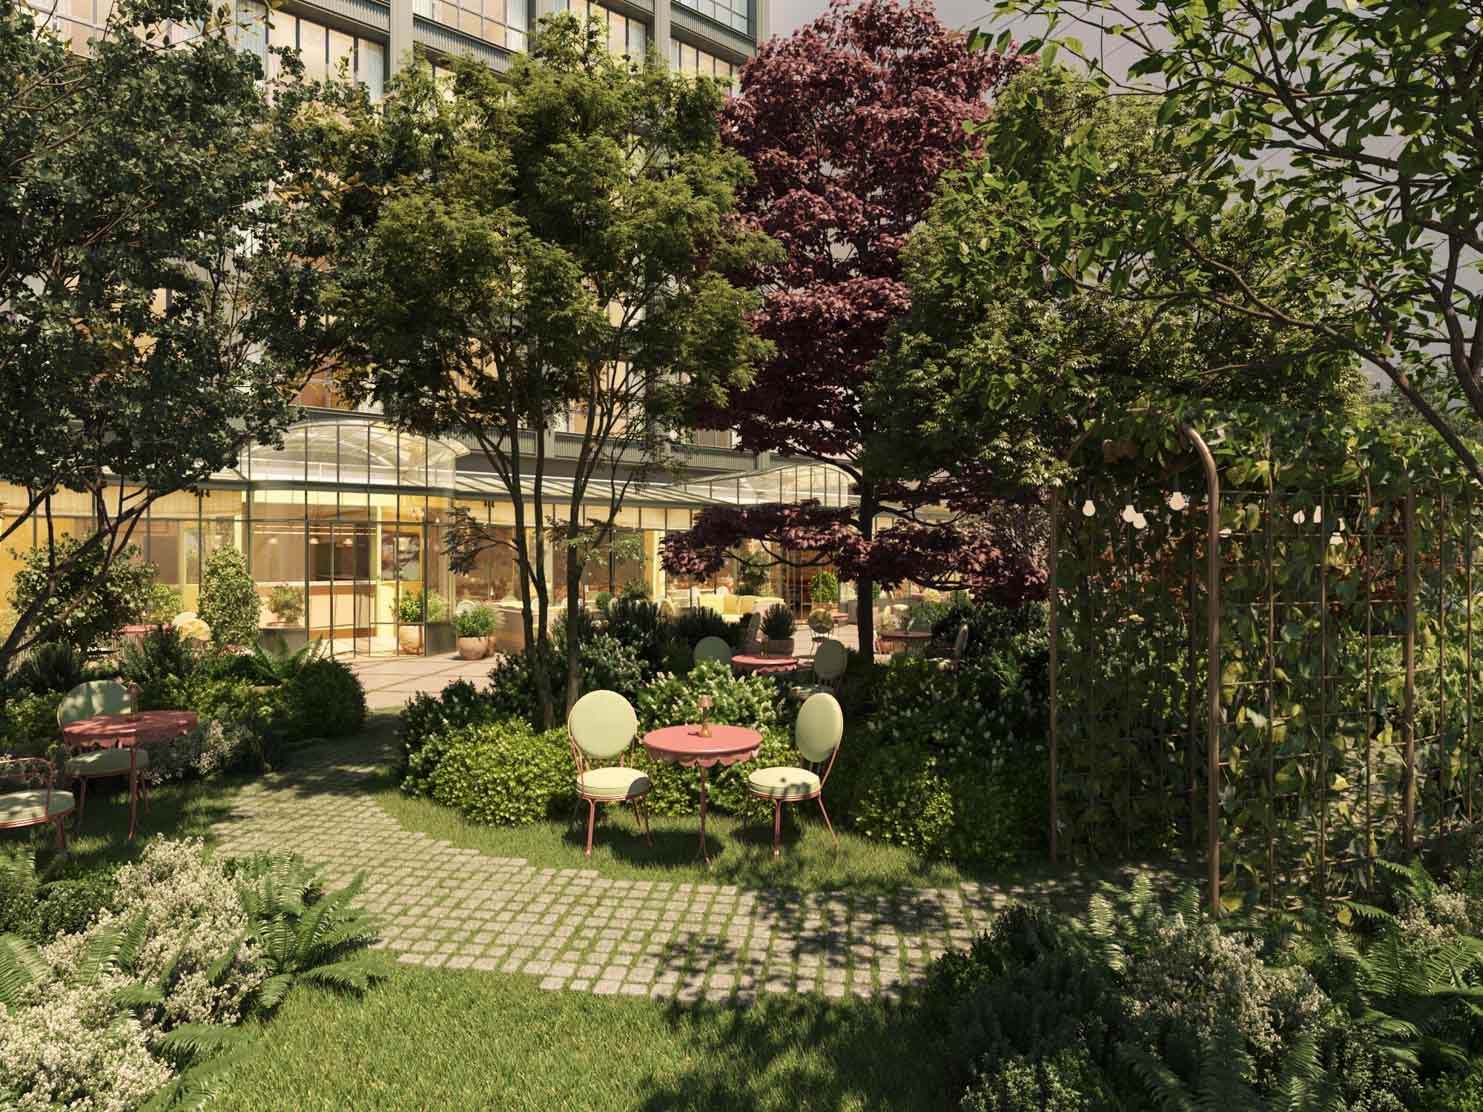 La Fantaisie taps into the deep heritage of its address,paying homage to Jacques and Jean Cadet, master gardeners to the French court in the 16th century